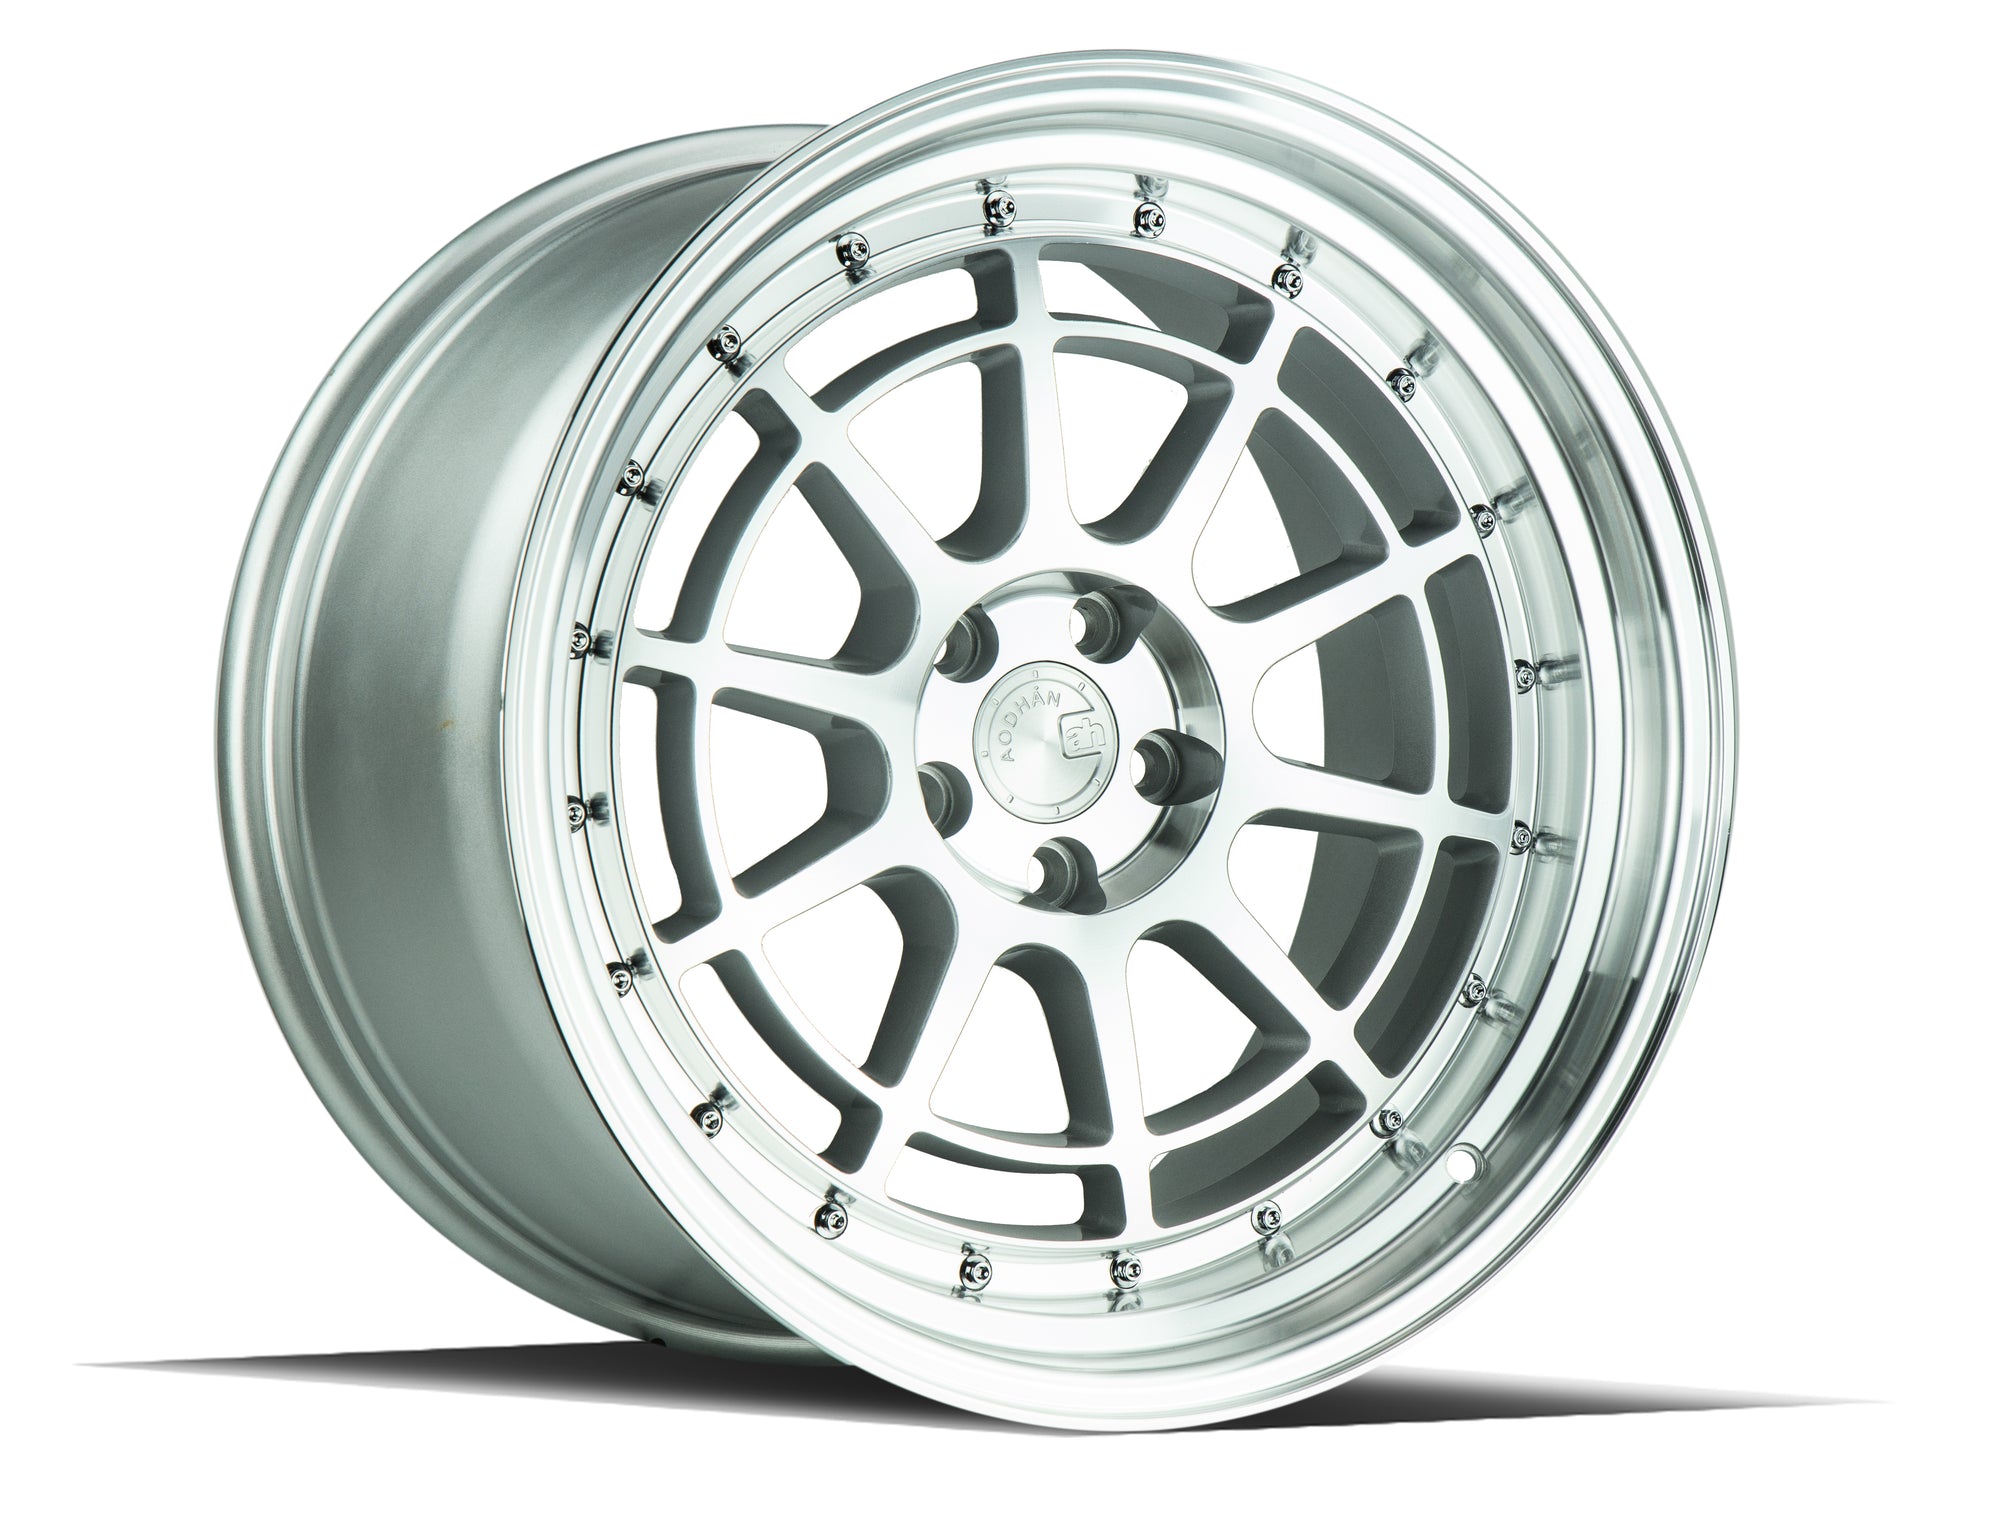 Aodhan AH04 18x9.5 5x114.3 +12 Silver Machined Face And Lip